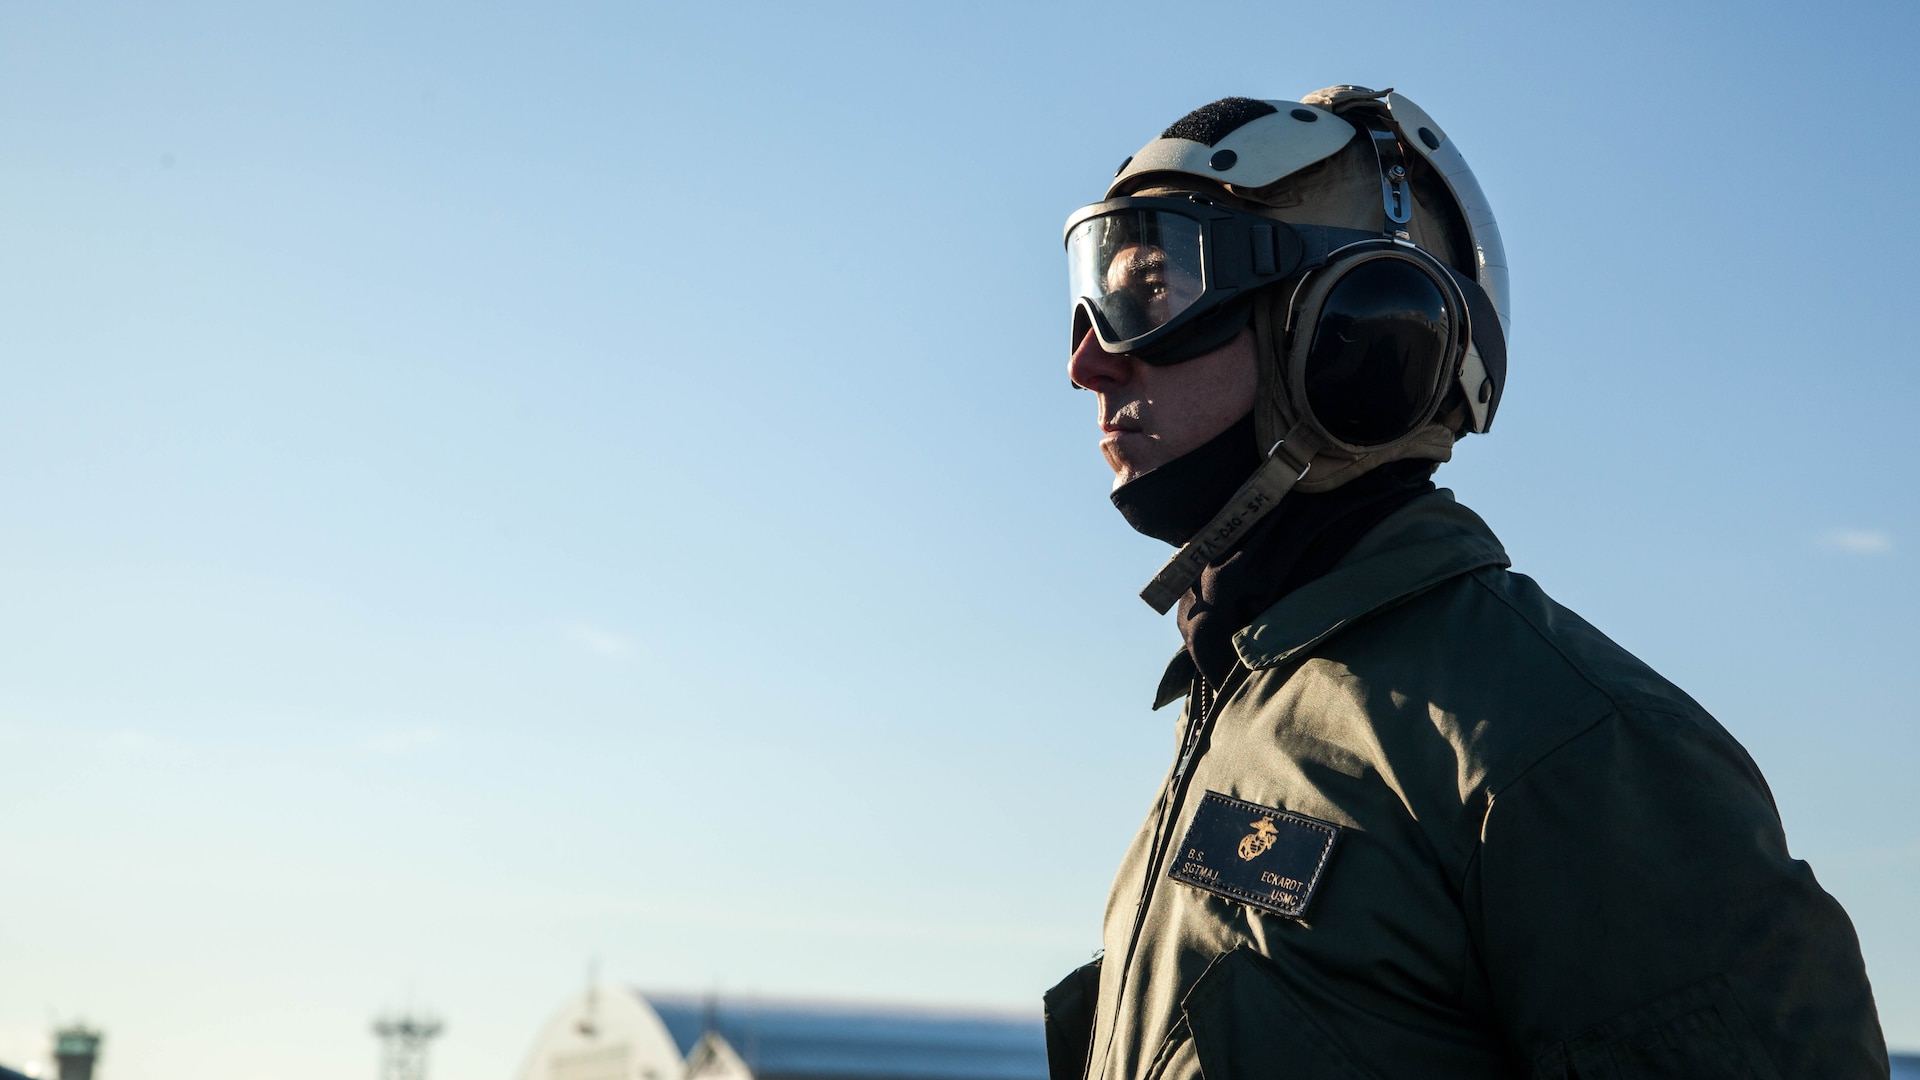 U.S. Marine Corps Sgt. Maj. Brandon Eckardt, sergeant major for Marine Attack Squadron (VMA) 542, conducts preflight inspections during the Aviation Training Relocation Program at Chitose Air Base, Japan, Dec. 8, 2016. During the ATR the Marines with the power line division for VMA-542 have ensured the safety of all aircraft involved through routine flight inspections, launching the aircraft and recovering the aircraft.